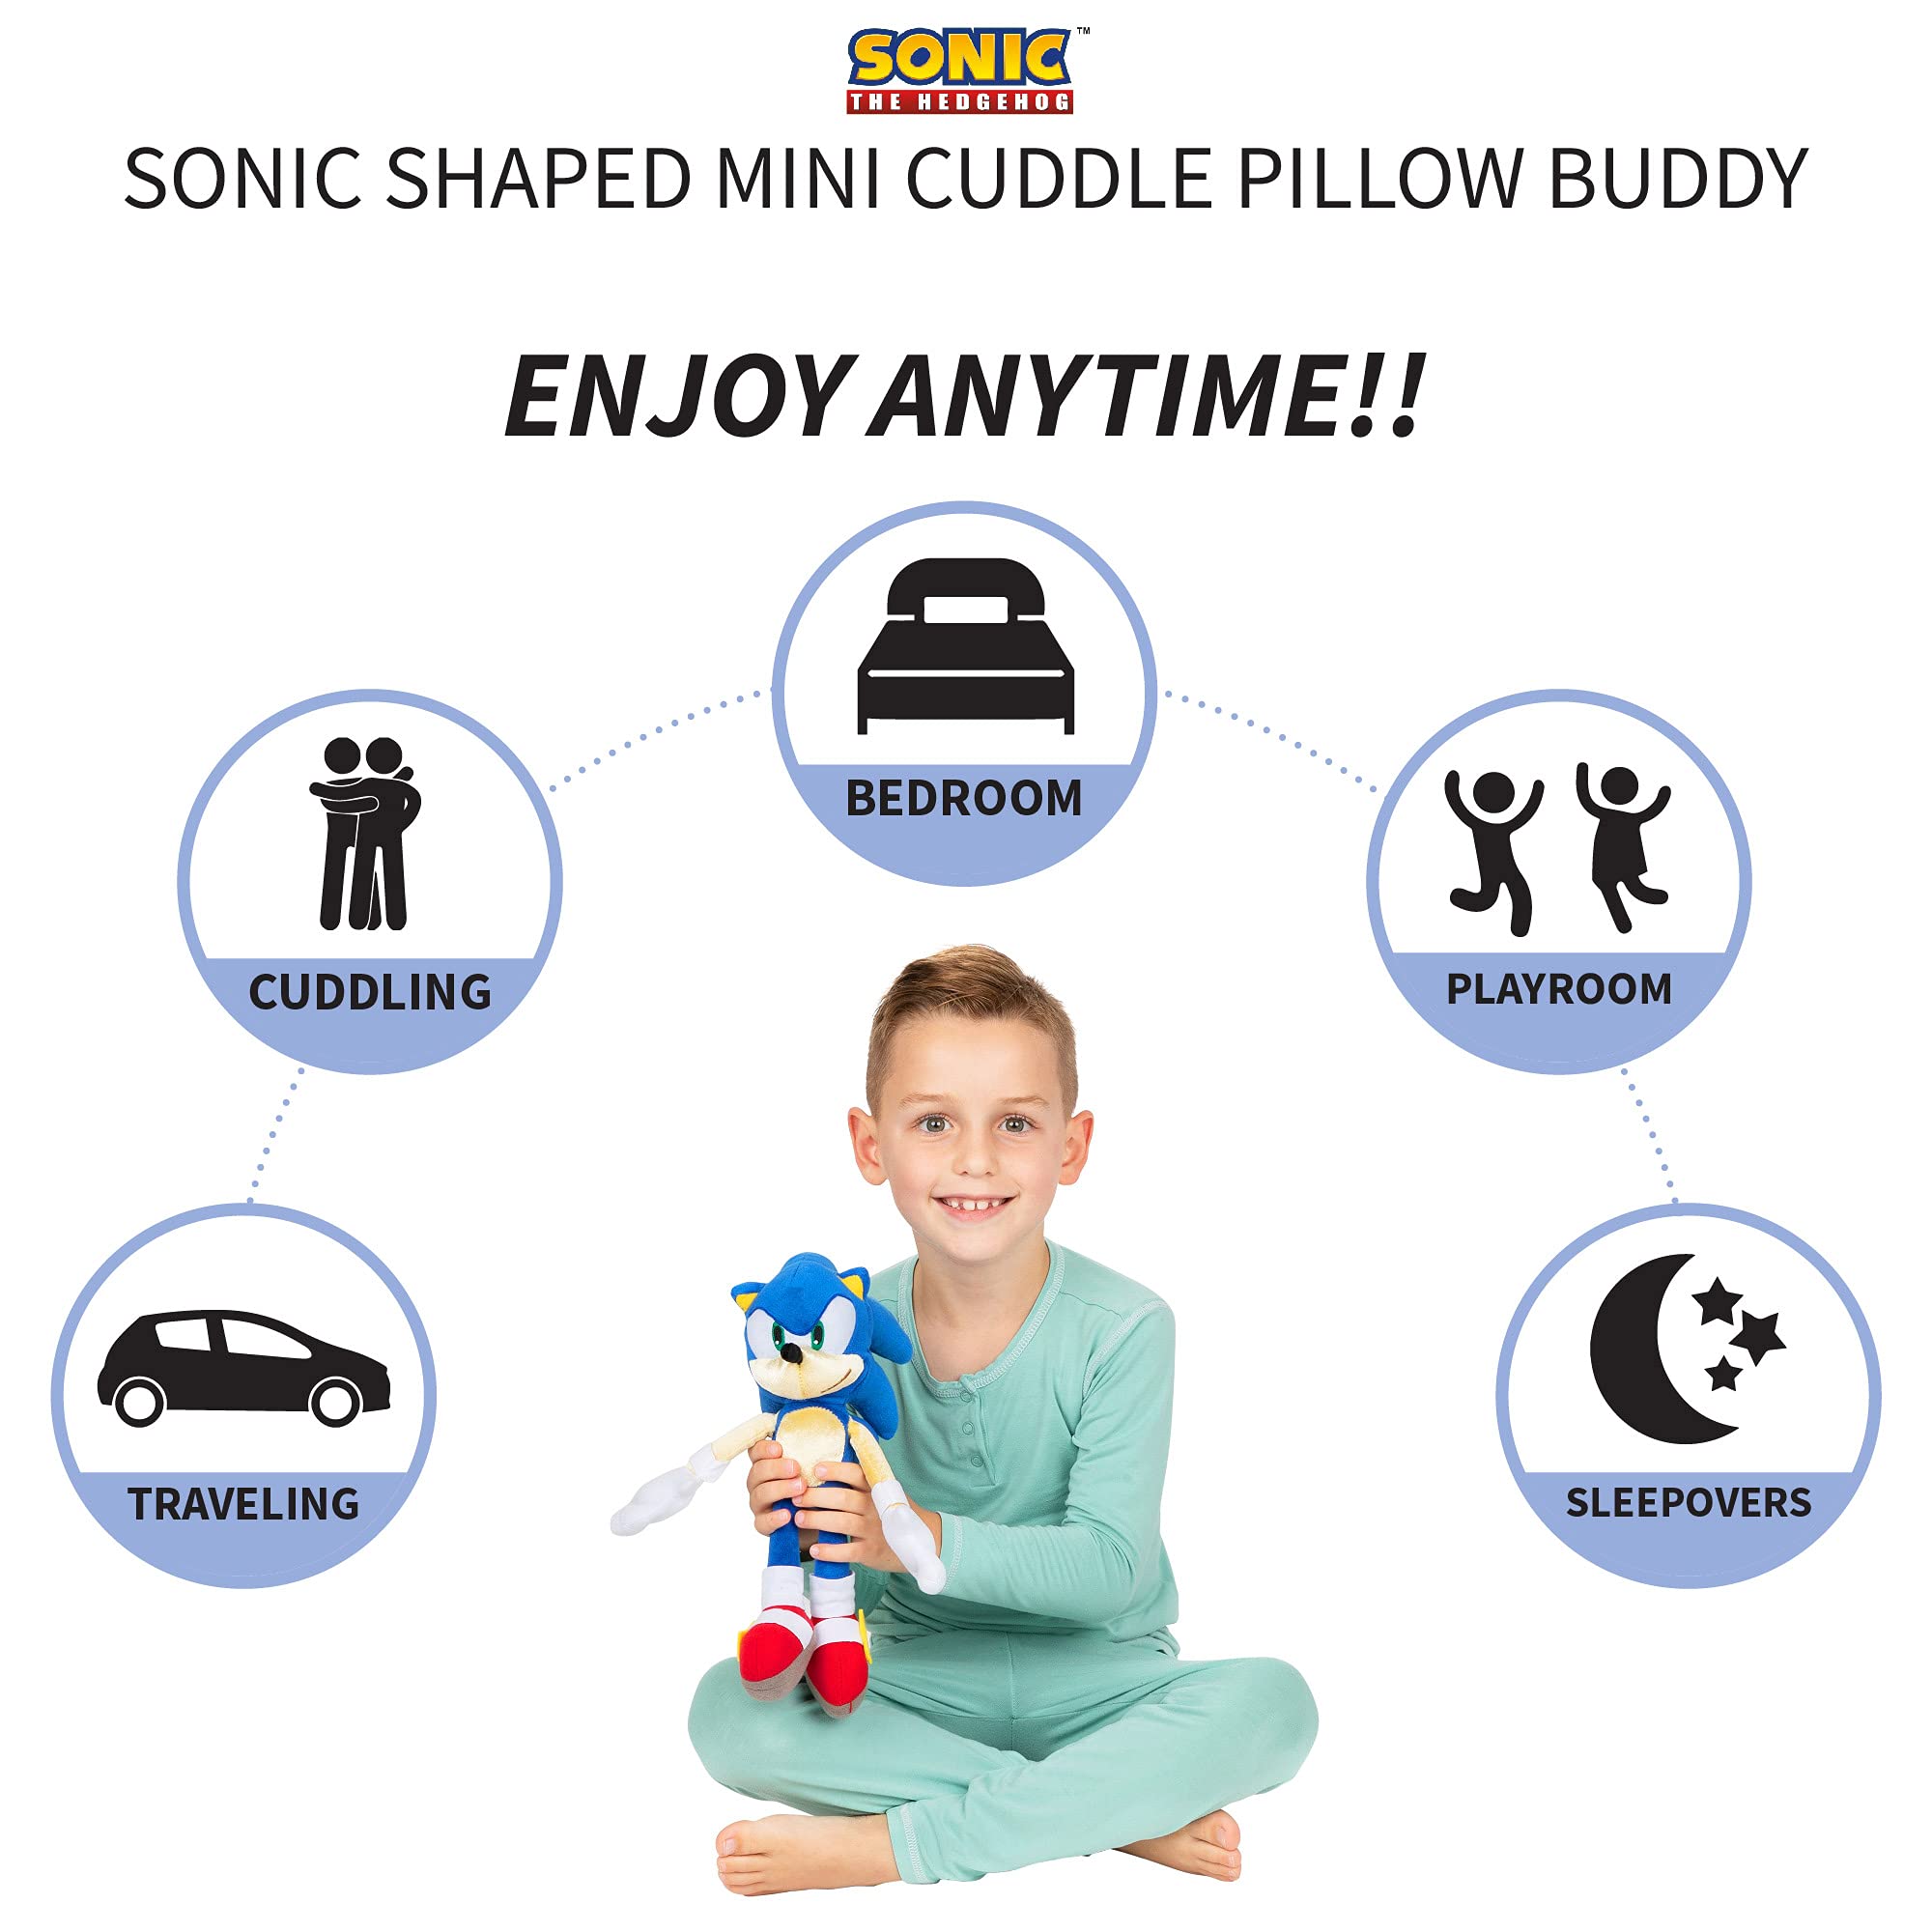 Franco Sonic The Hedgehog Anime Kids Bedding Twin/Full Comforter with Twin Sheet Set and Cuddle Pillow, 5 Piece Bedroom Set (Official Sega Licensed Product)